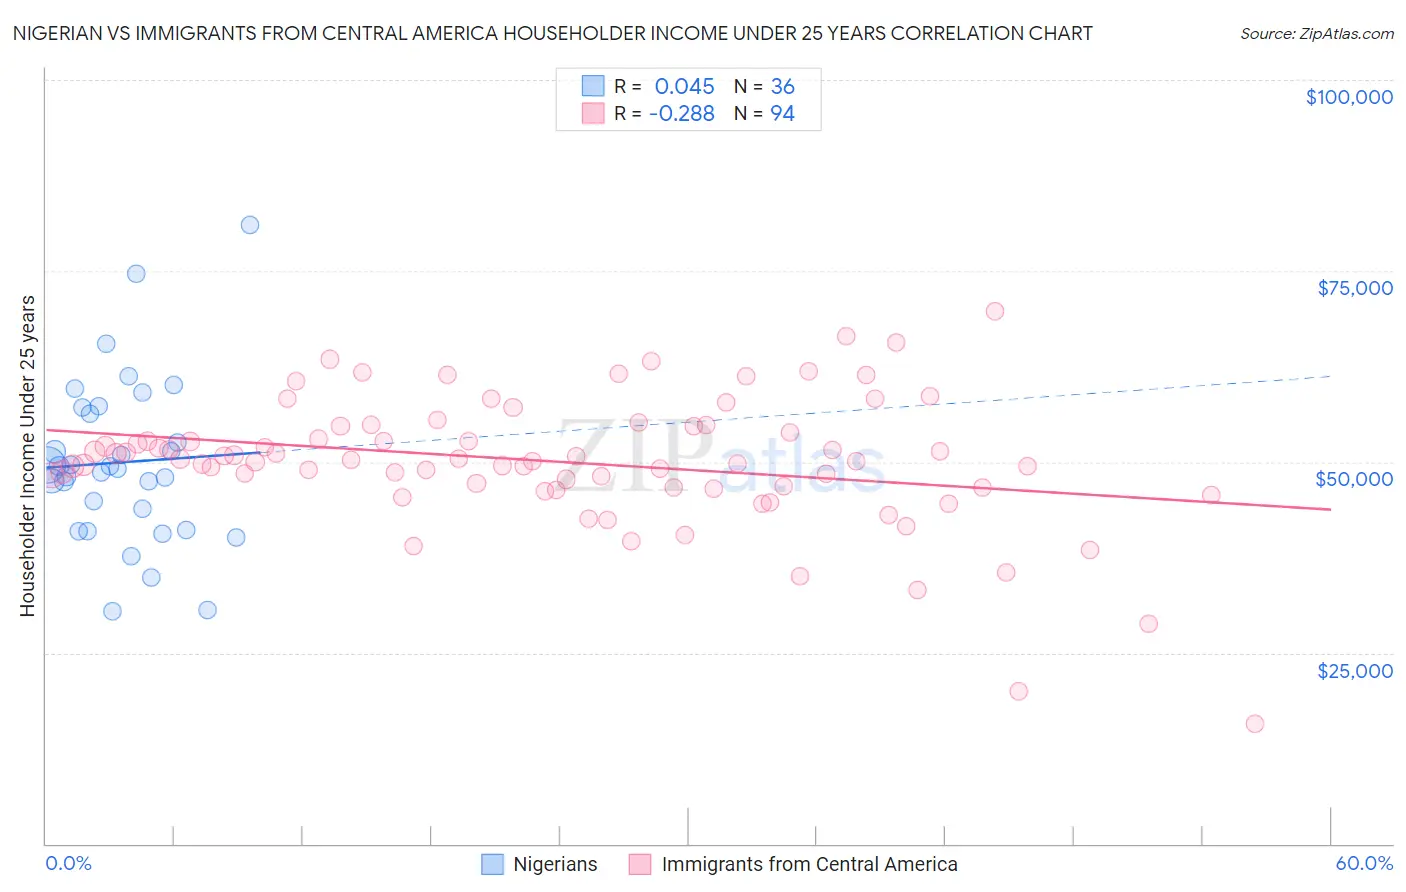 Nigerian vs Immigrants from Central America Householder Income Under 25 years